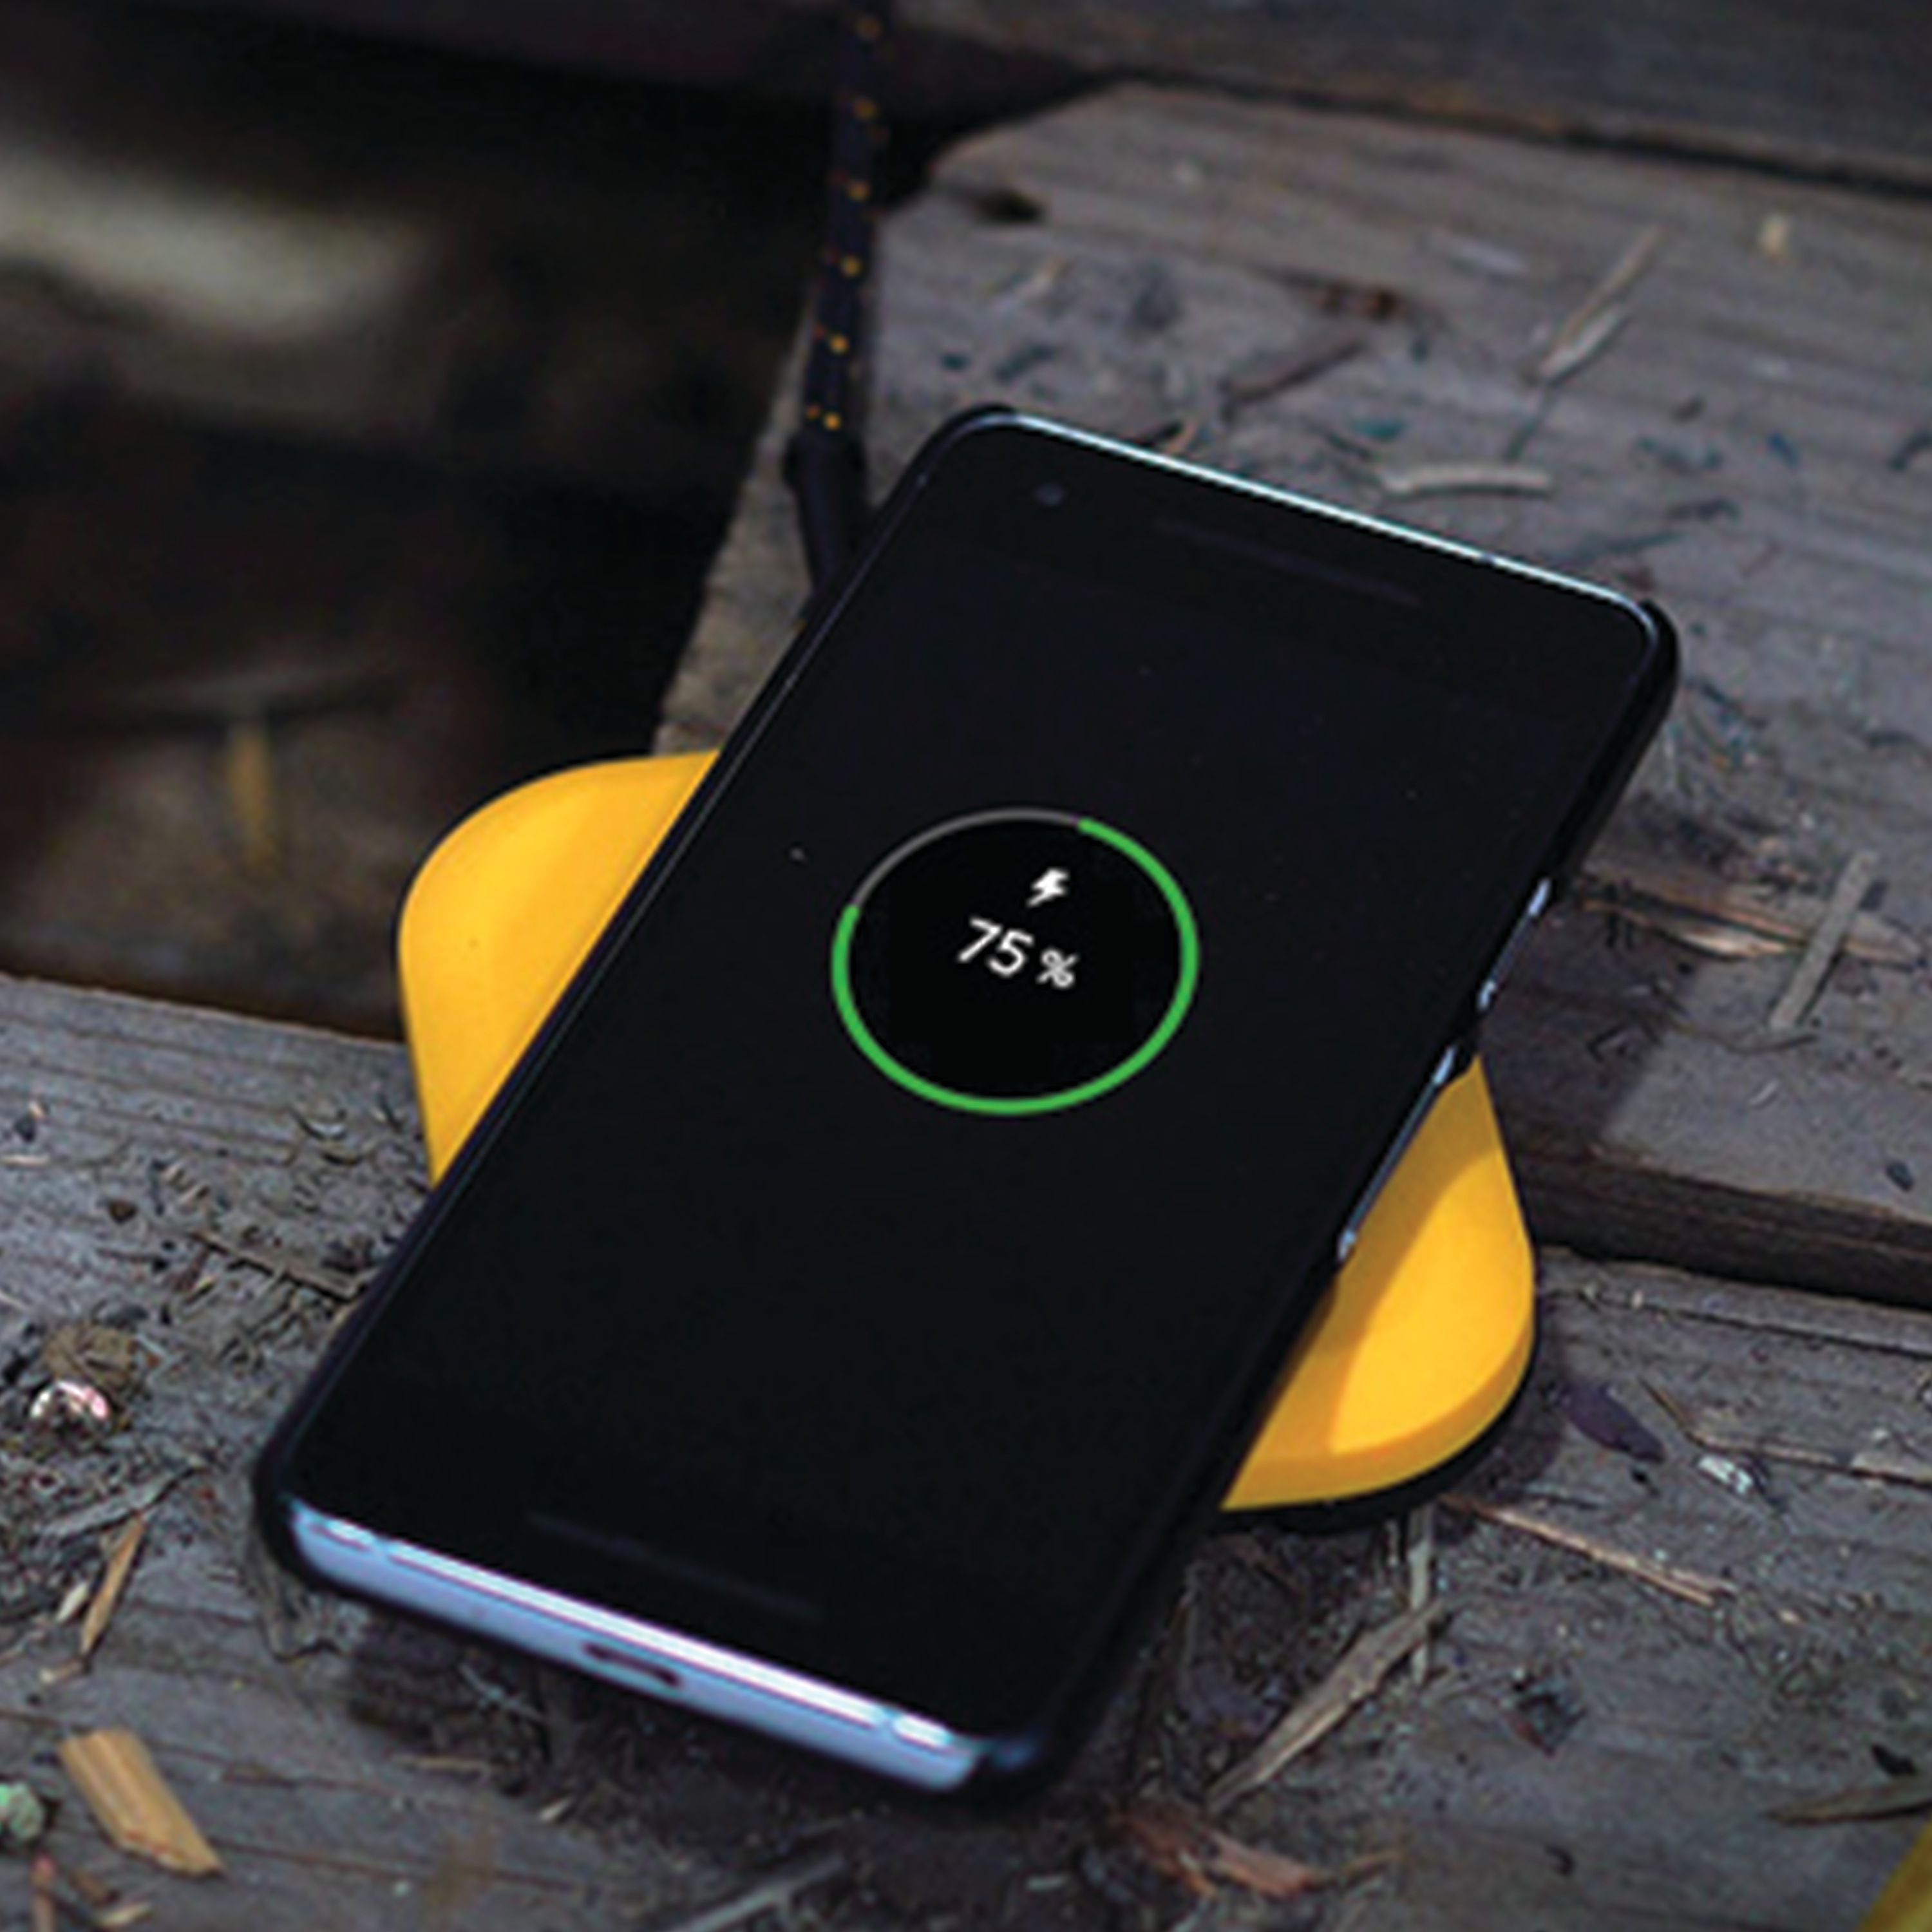 Fast Wireless Charging Pad charging smartphone.